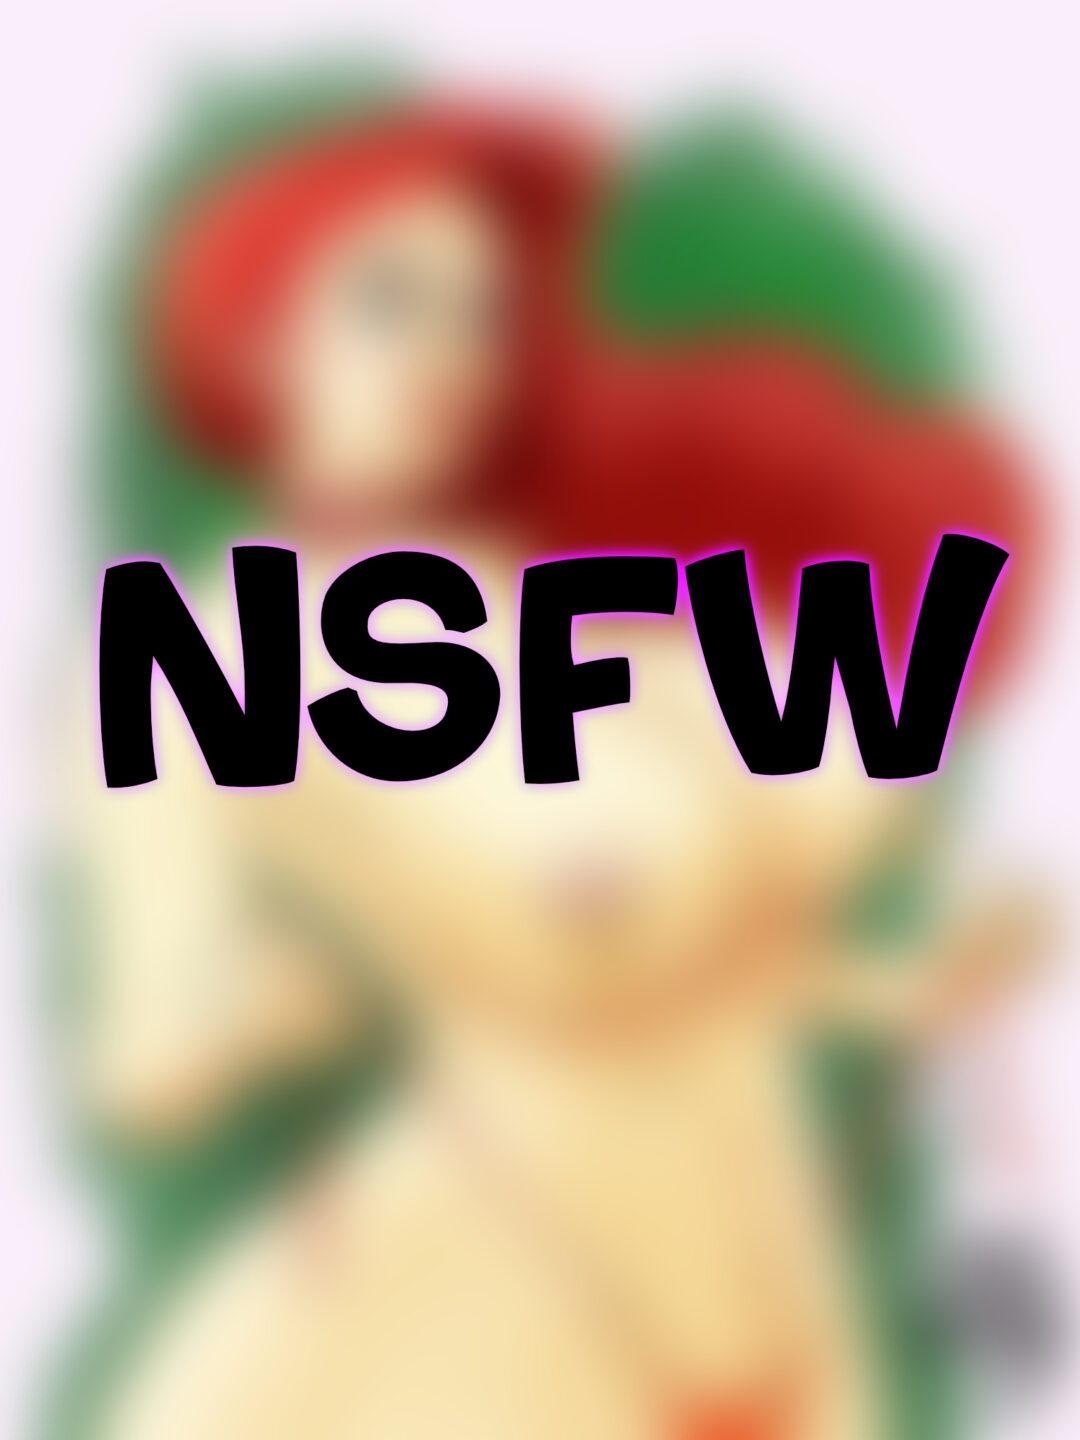 A blurry censored image of a camp counselor pinup